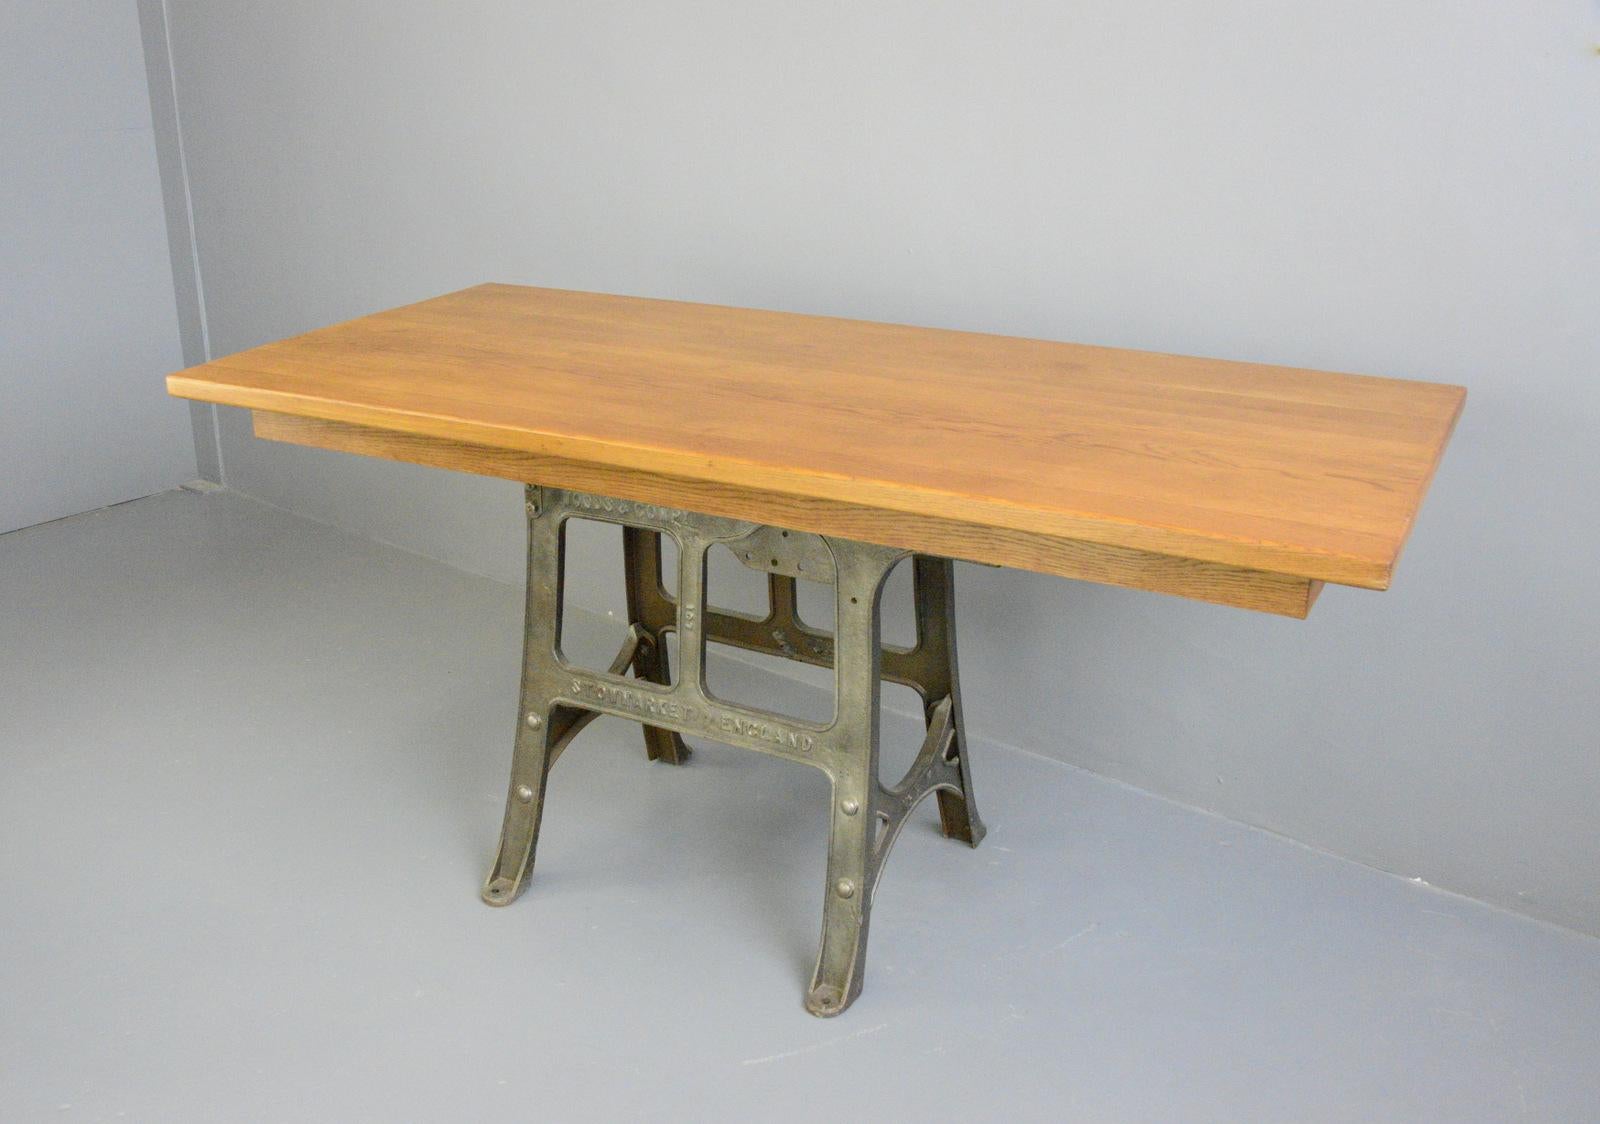 Large industrial table by Woods & Co Circa 1910.

- Cast iron base
- Solid oak top
- English ~ 1910
- Measures: 98cm tall x 90cm deep x 200cm long.

  